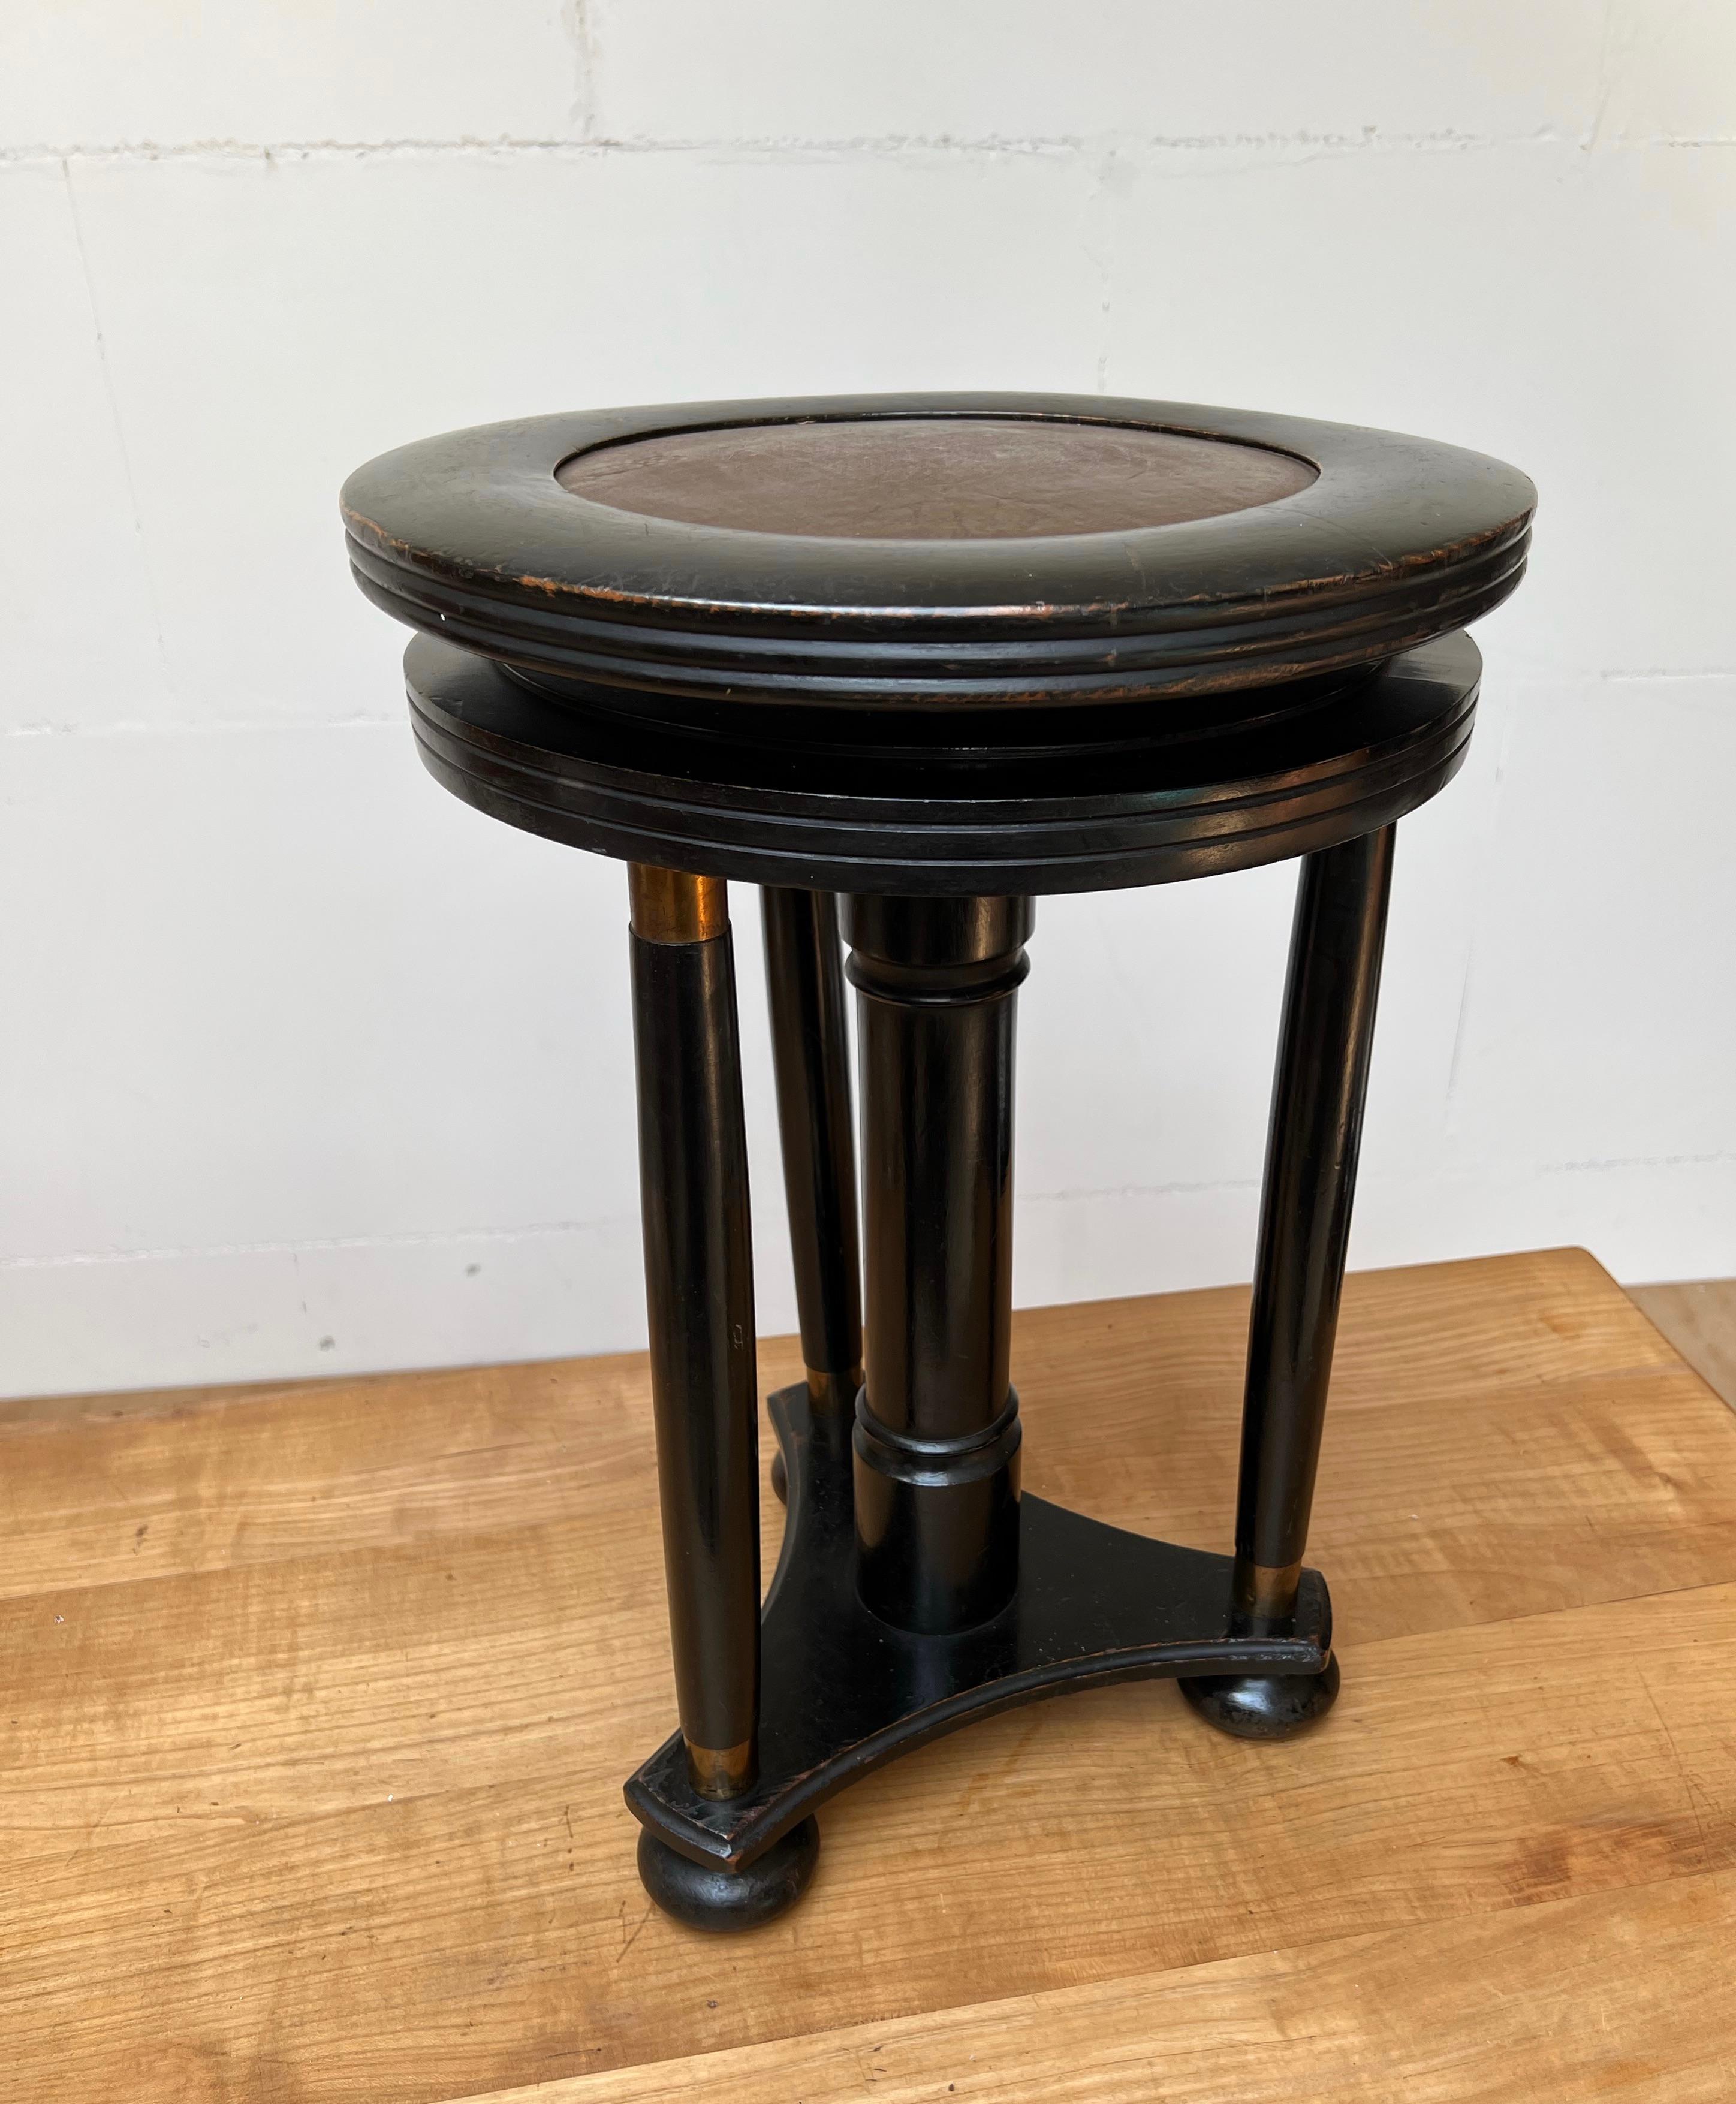 Stylish Blackened Wooden and Brass Art Deco Desk or Piano Swivel Stool, ca 1900 In Good Condition For Sale In Lisse, NL